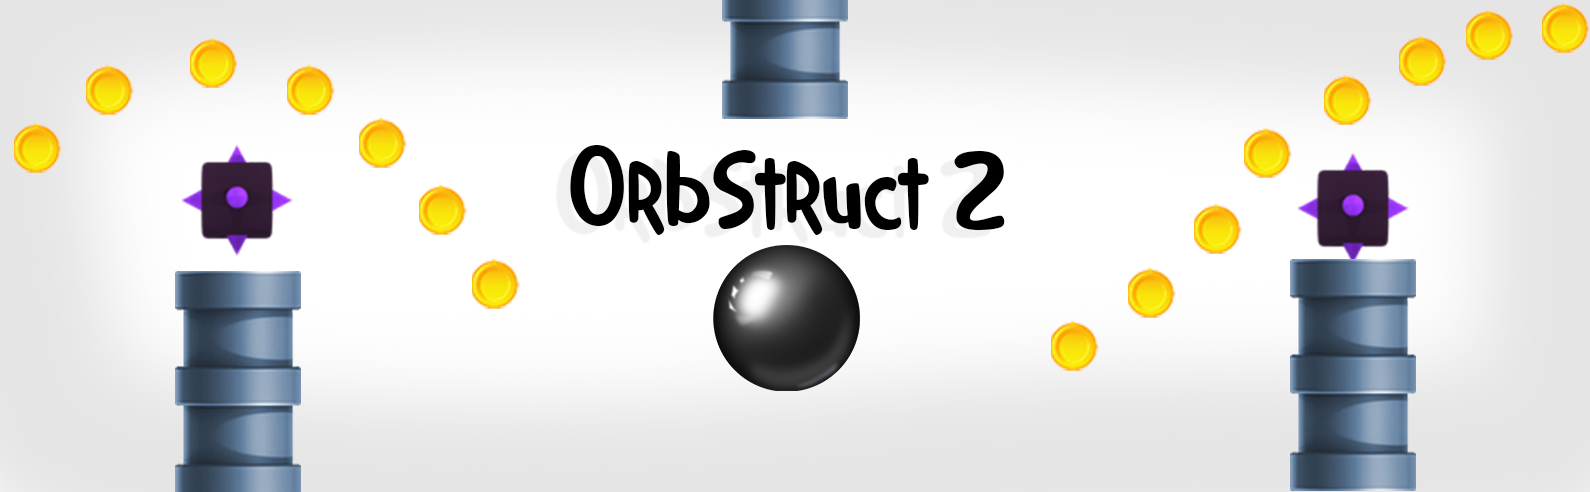 Orbstruct